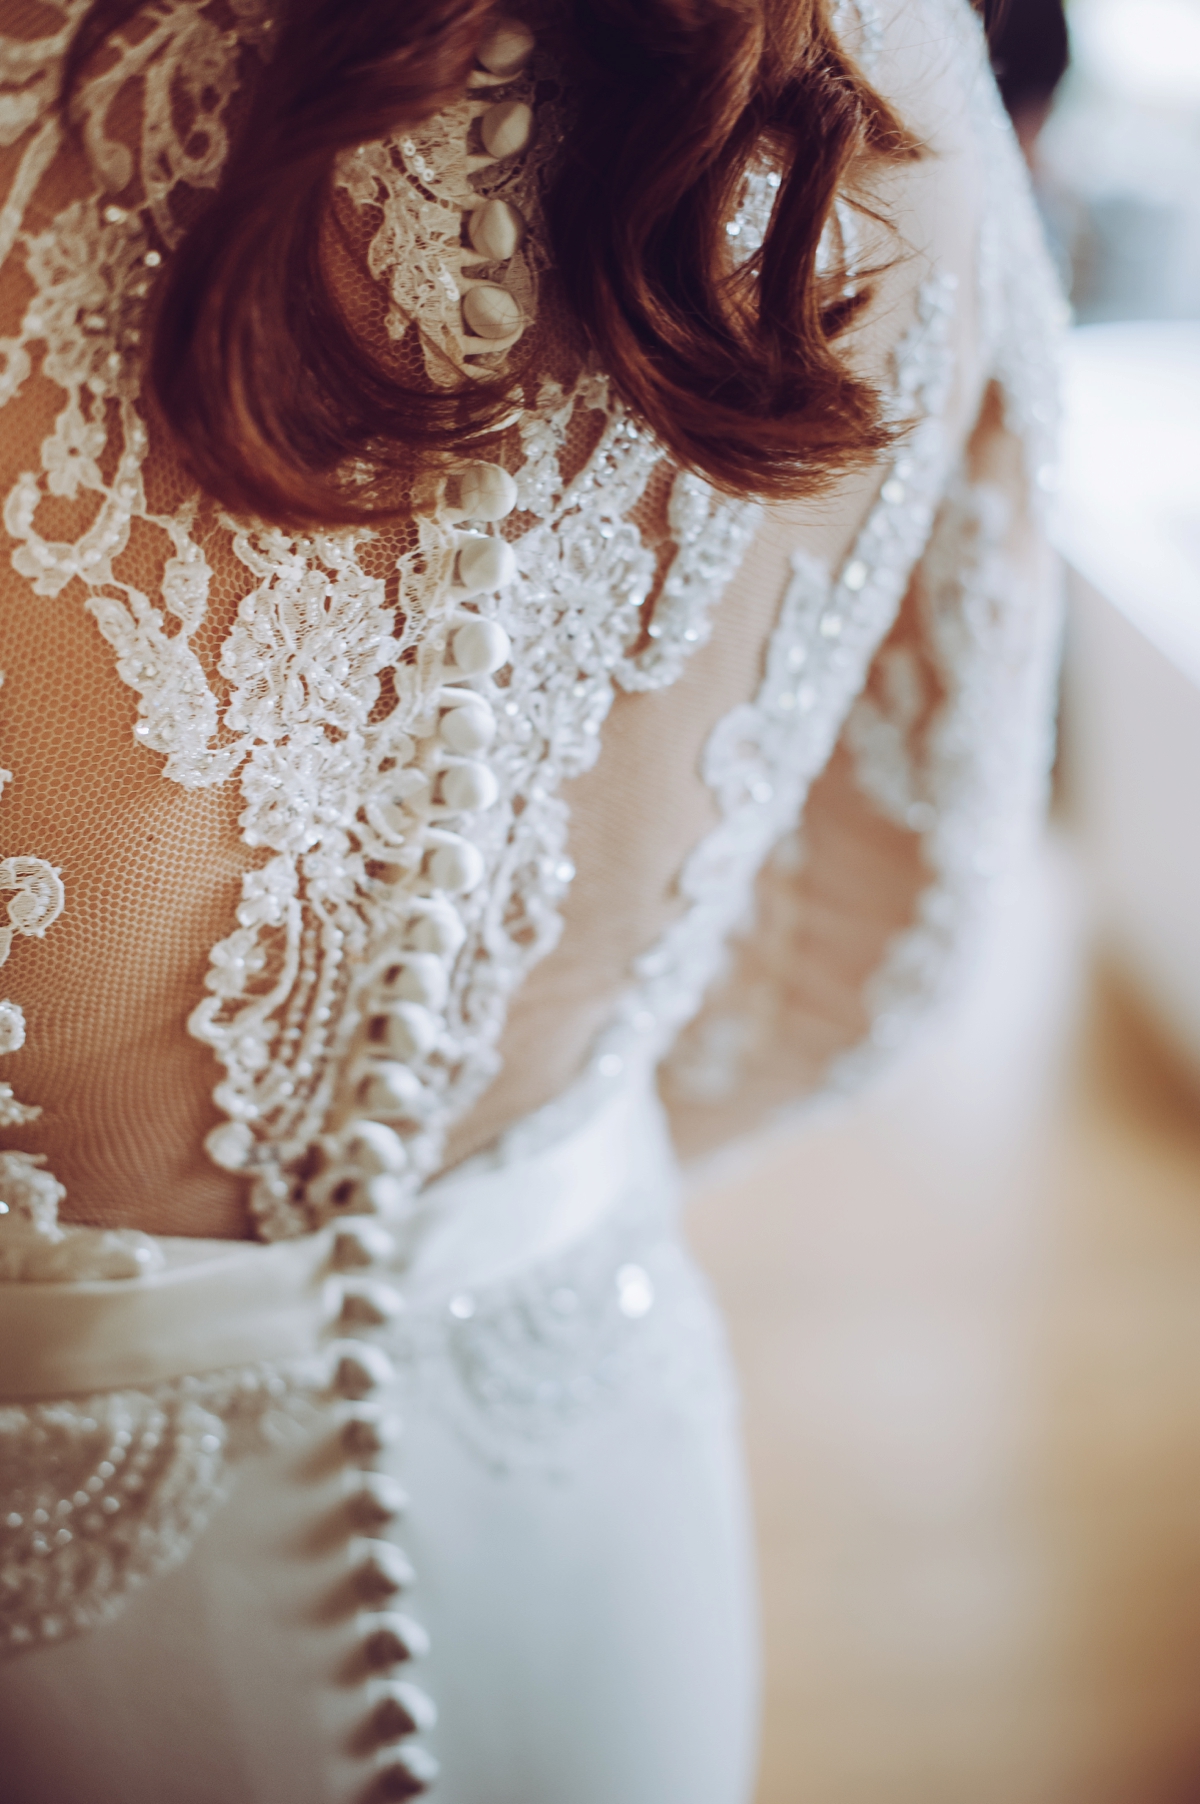 Lynsey wearing a dress from The Bride - Zoe C Photography